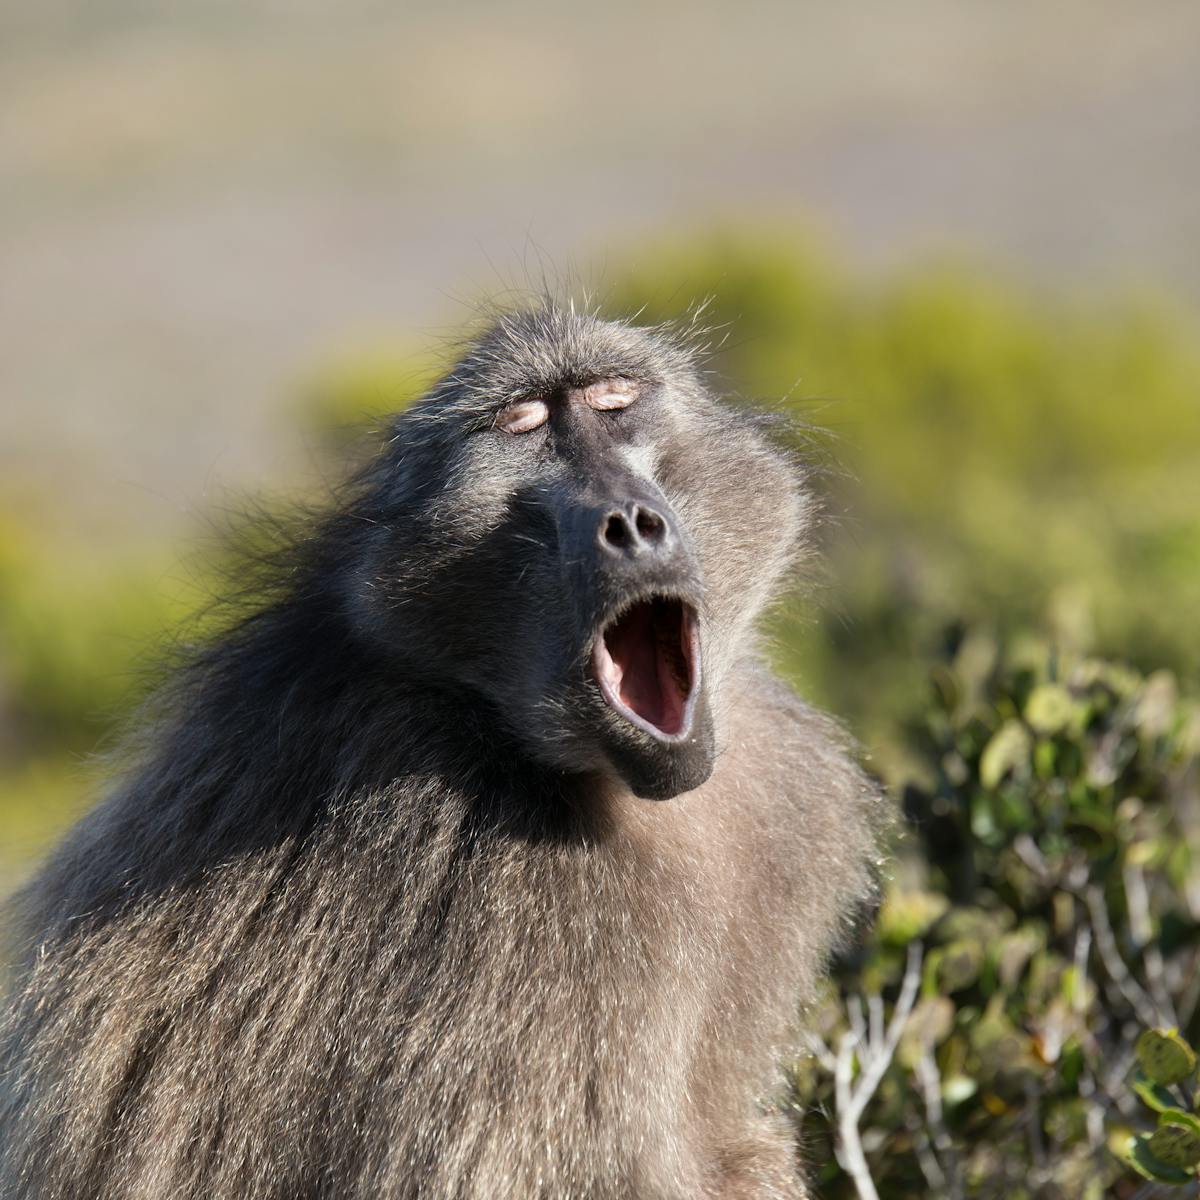 Examining how primates make vowel sounds pushes timeline for speech  evolution back by 27 million years